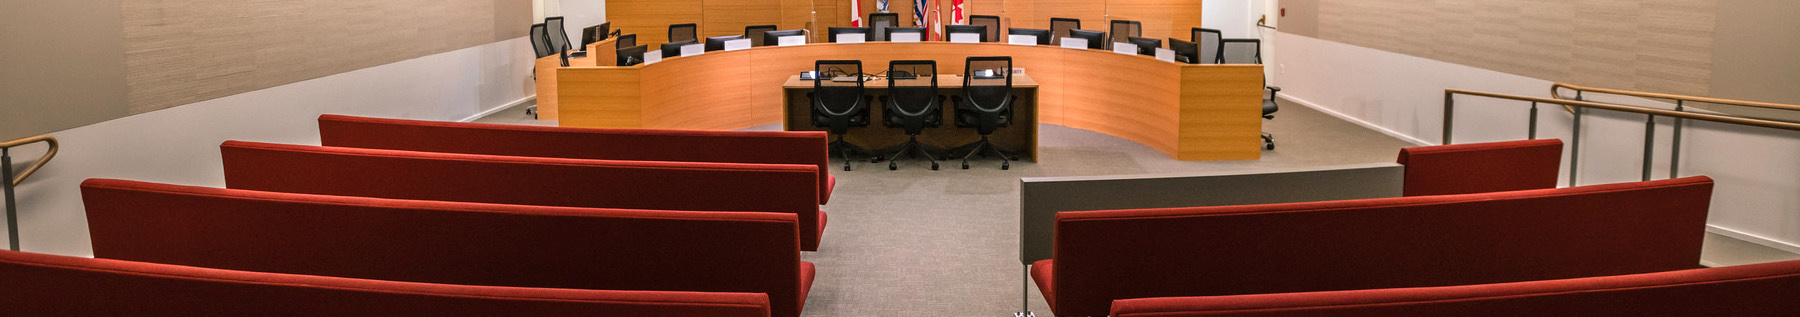 City of North Vancouver Council Chambers